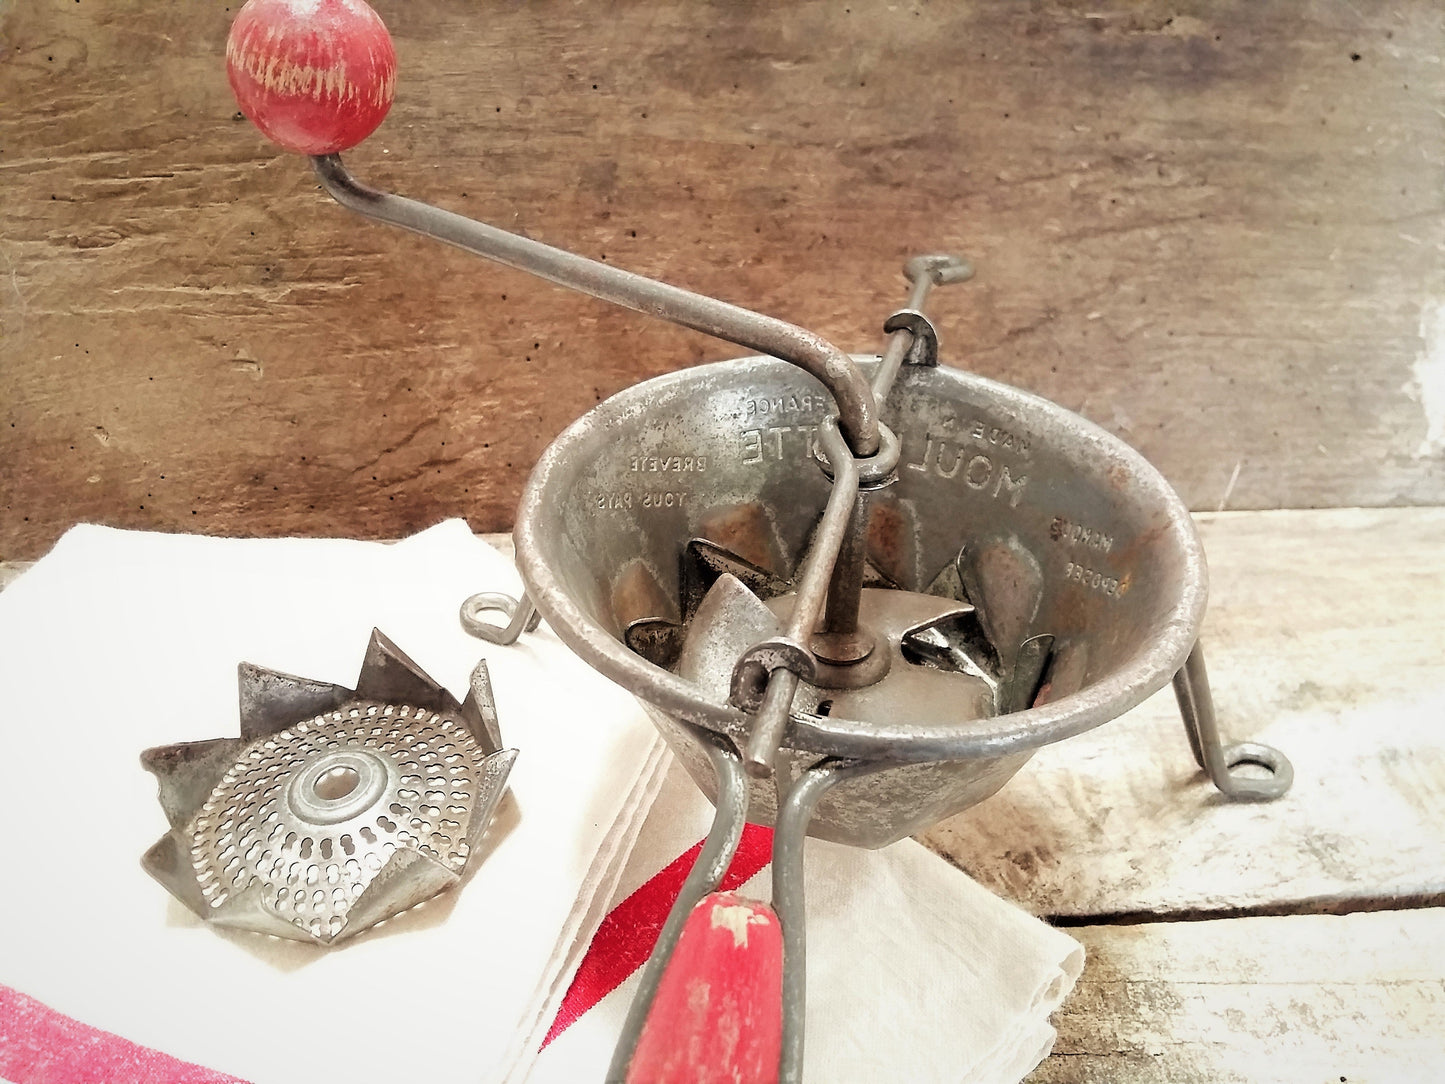 Original 1950s Tin MOULINETTE Slicer Grater with TWO Grating Discs. from Tiggy & Pip - €75.00! Shop now at Tiggy and Pip